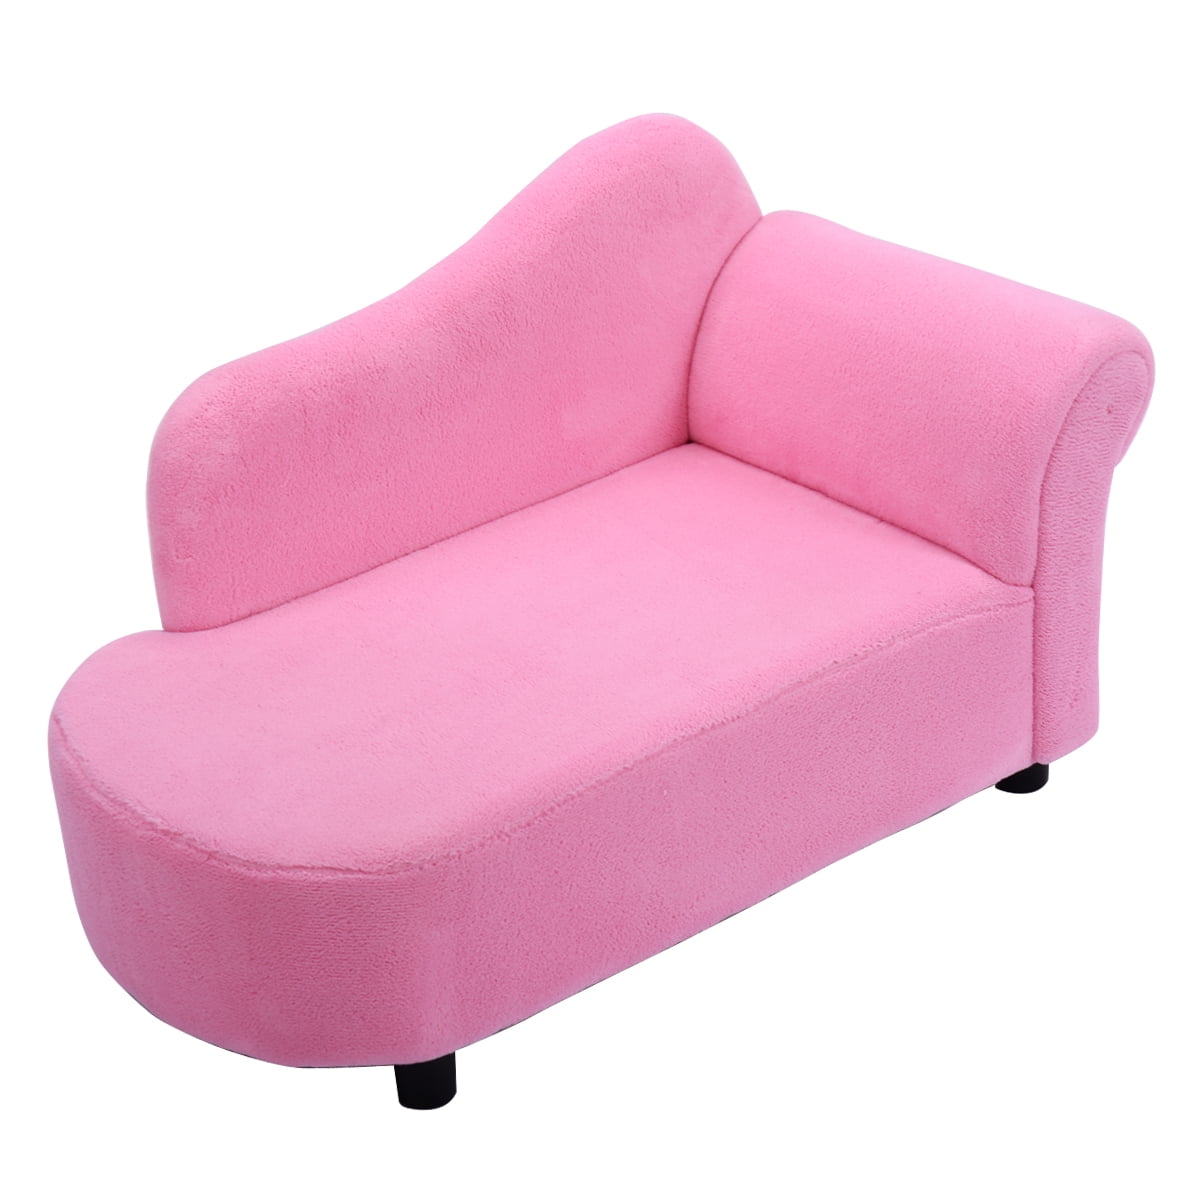 Pink Sofa for sale in UK | 105 used Pink Sofas